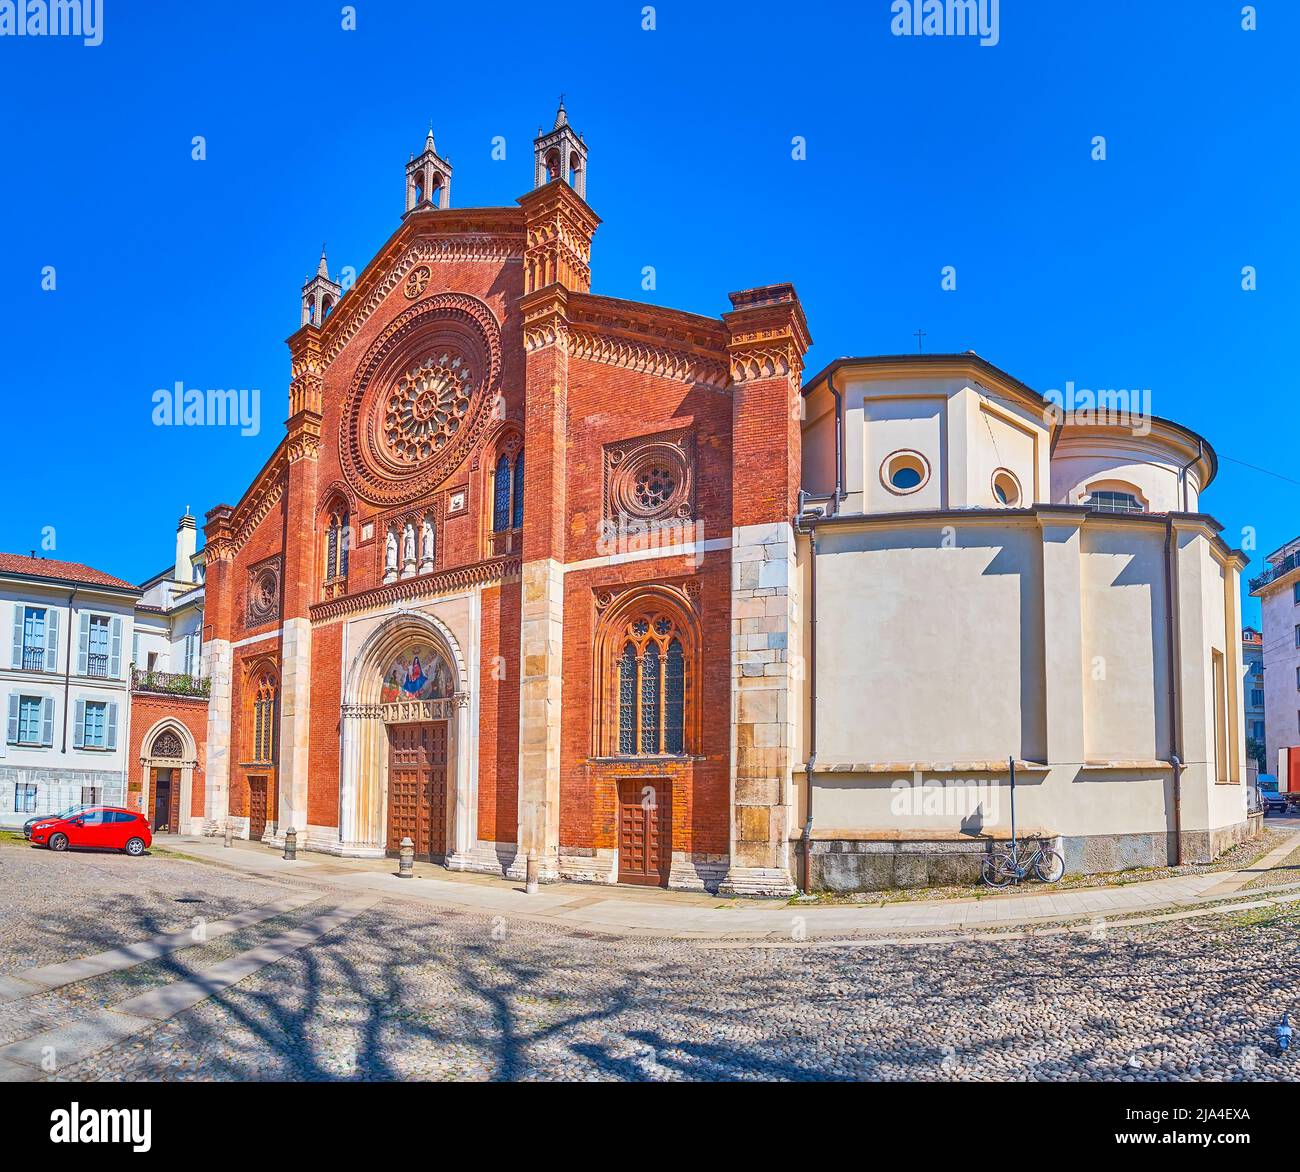 MILAN, ITALY - APRIL 5, 2022: The beautiful facade of the Church of San Marco, located on Piazza San Marco, on April 5 in Milan, Italy Stock Photo